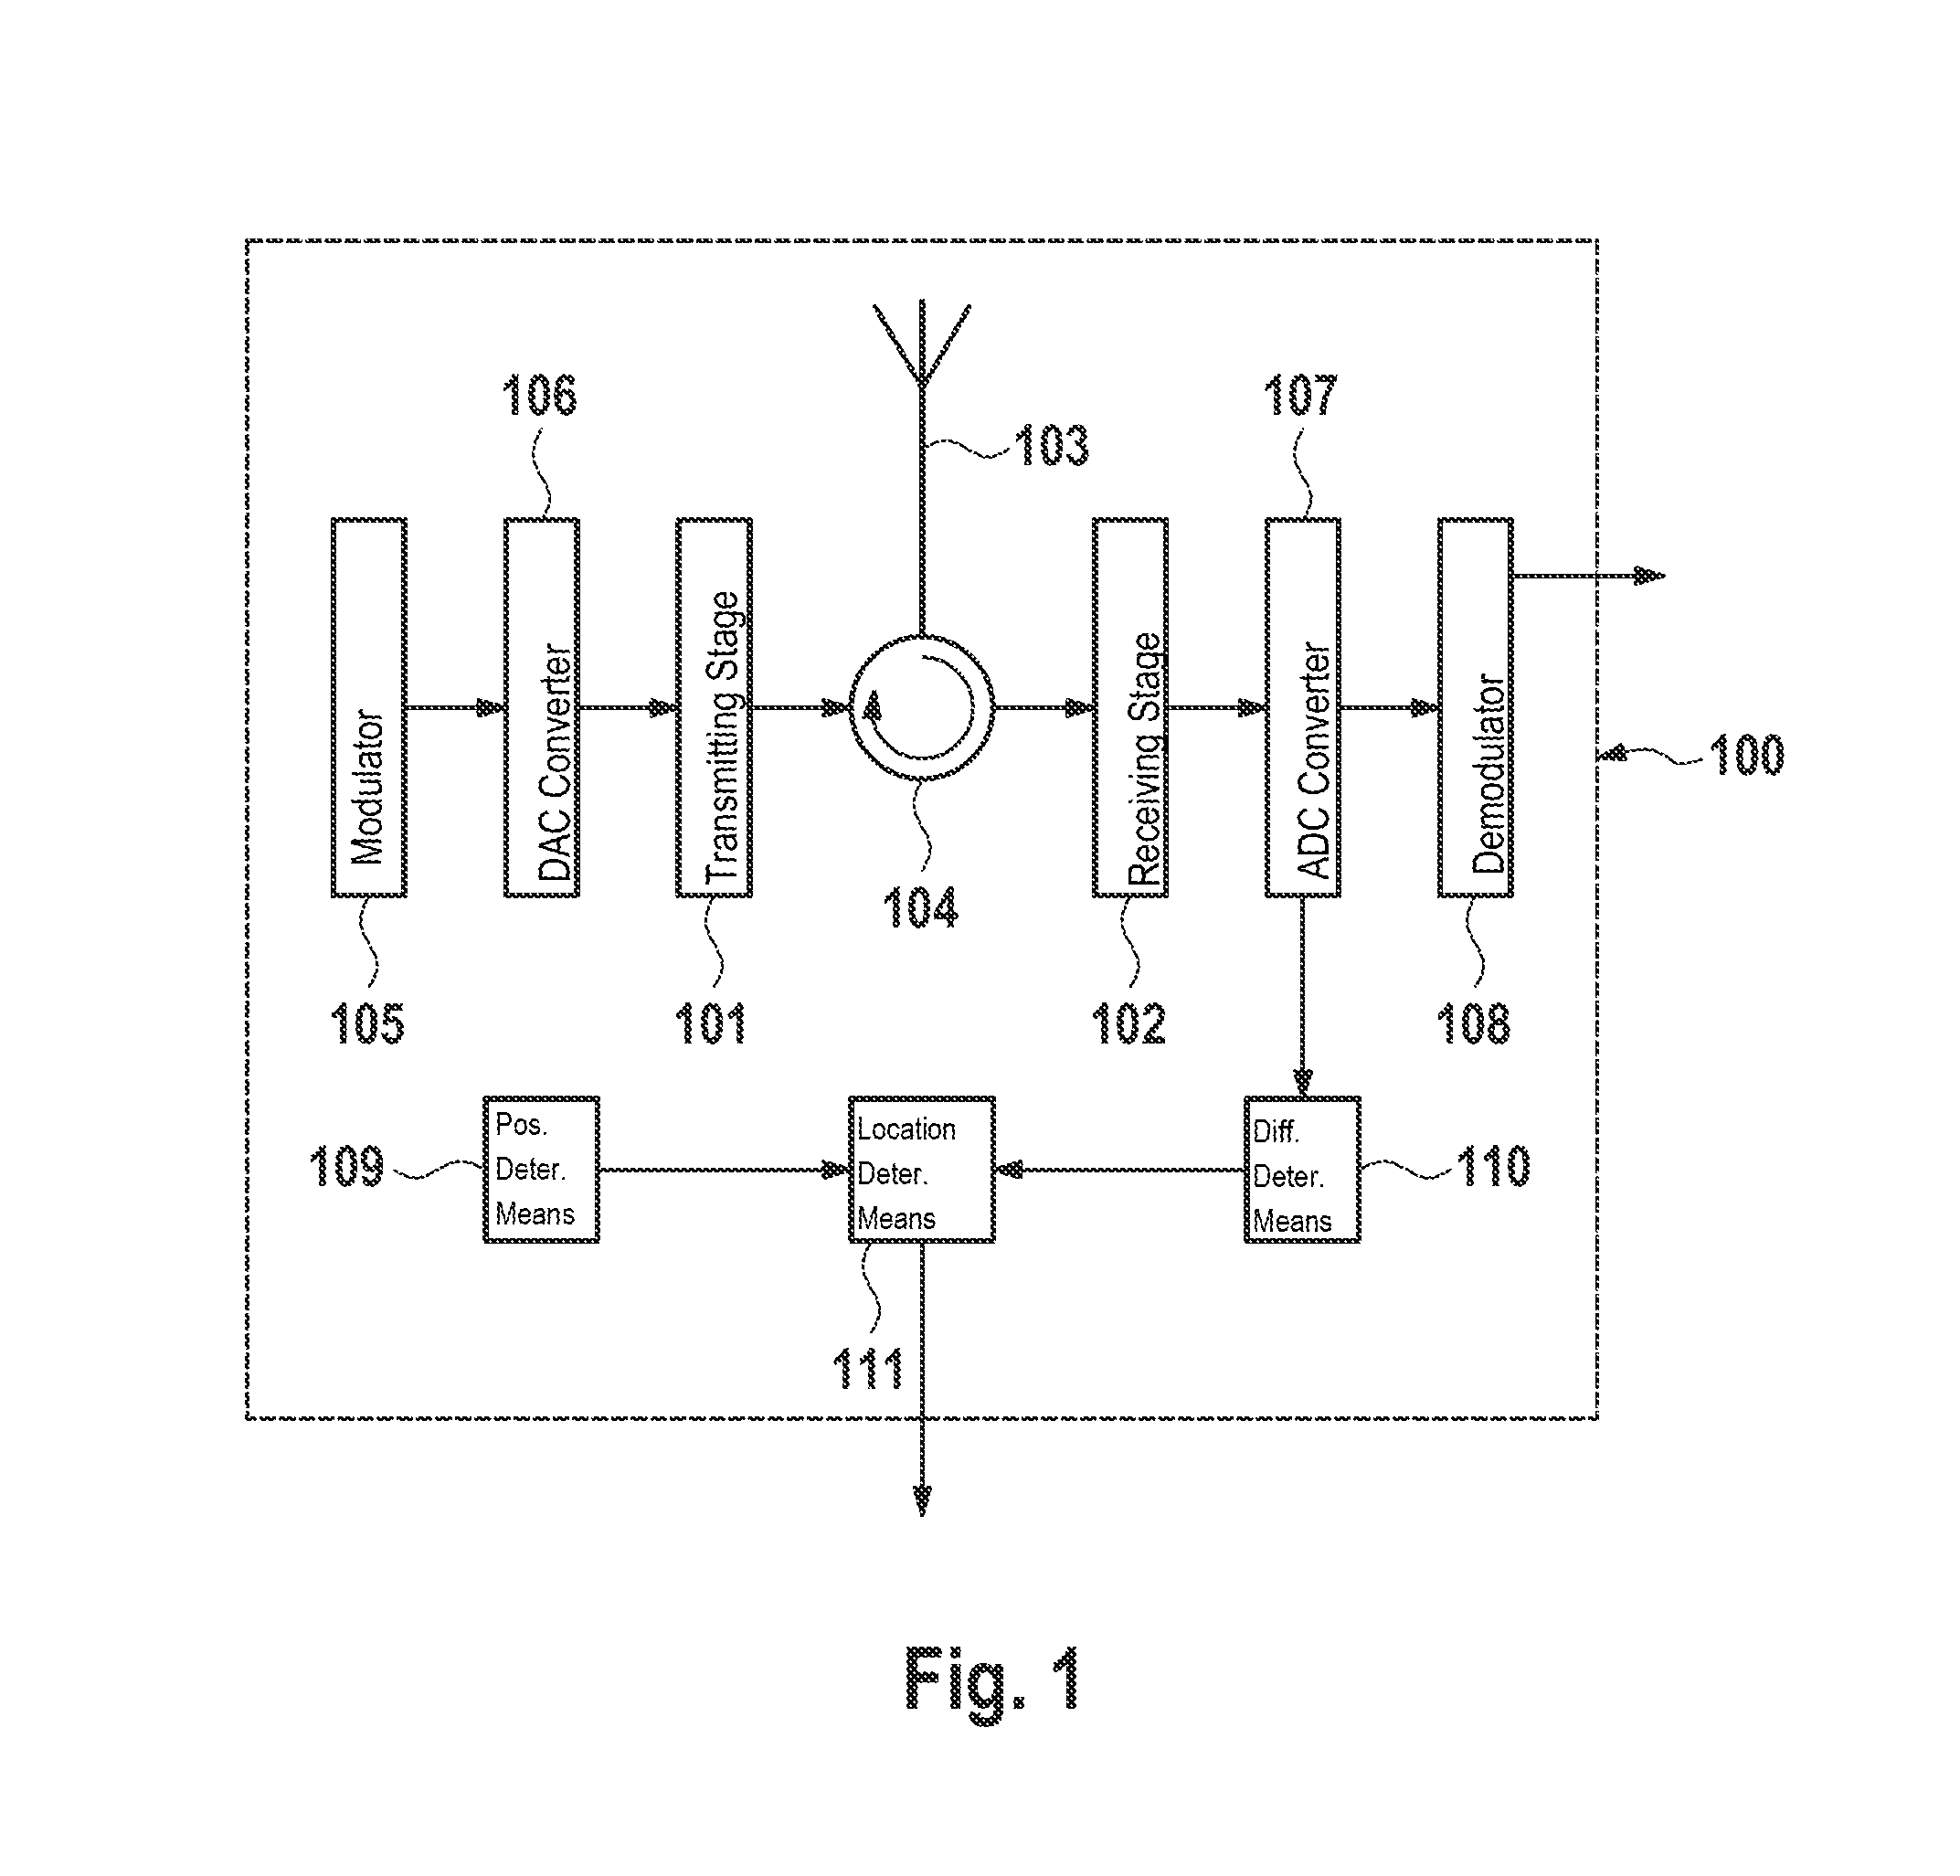 Method and device for the position determination of objects in road traffic, based on communication signals, and use of the device